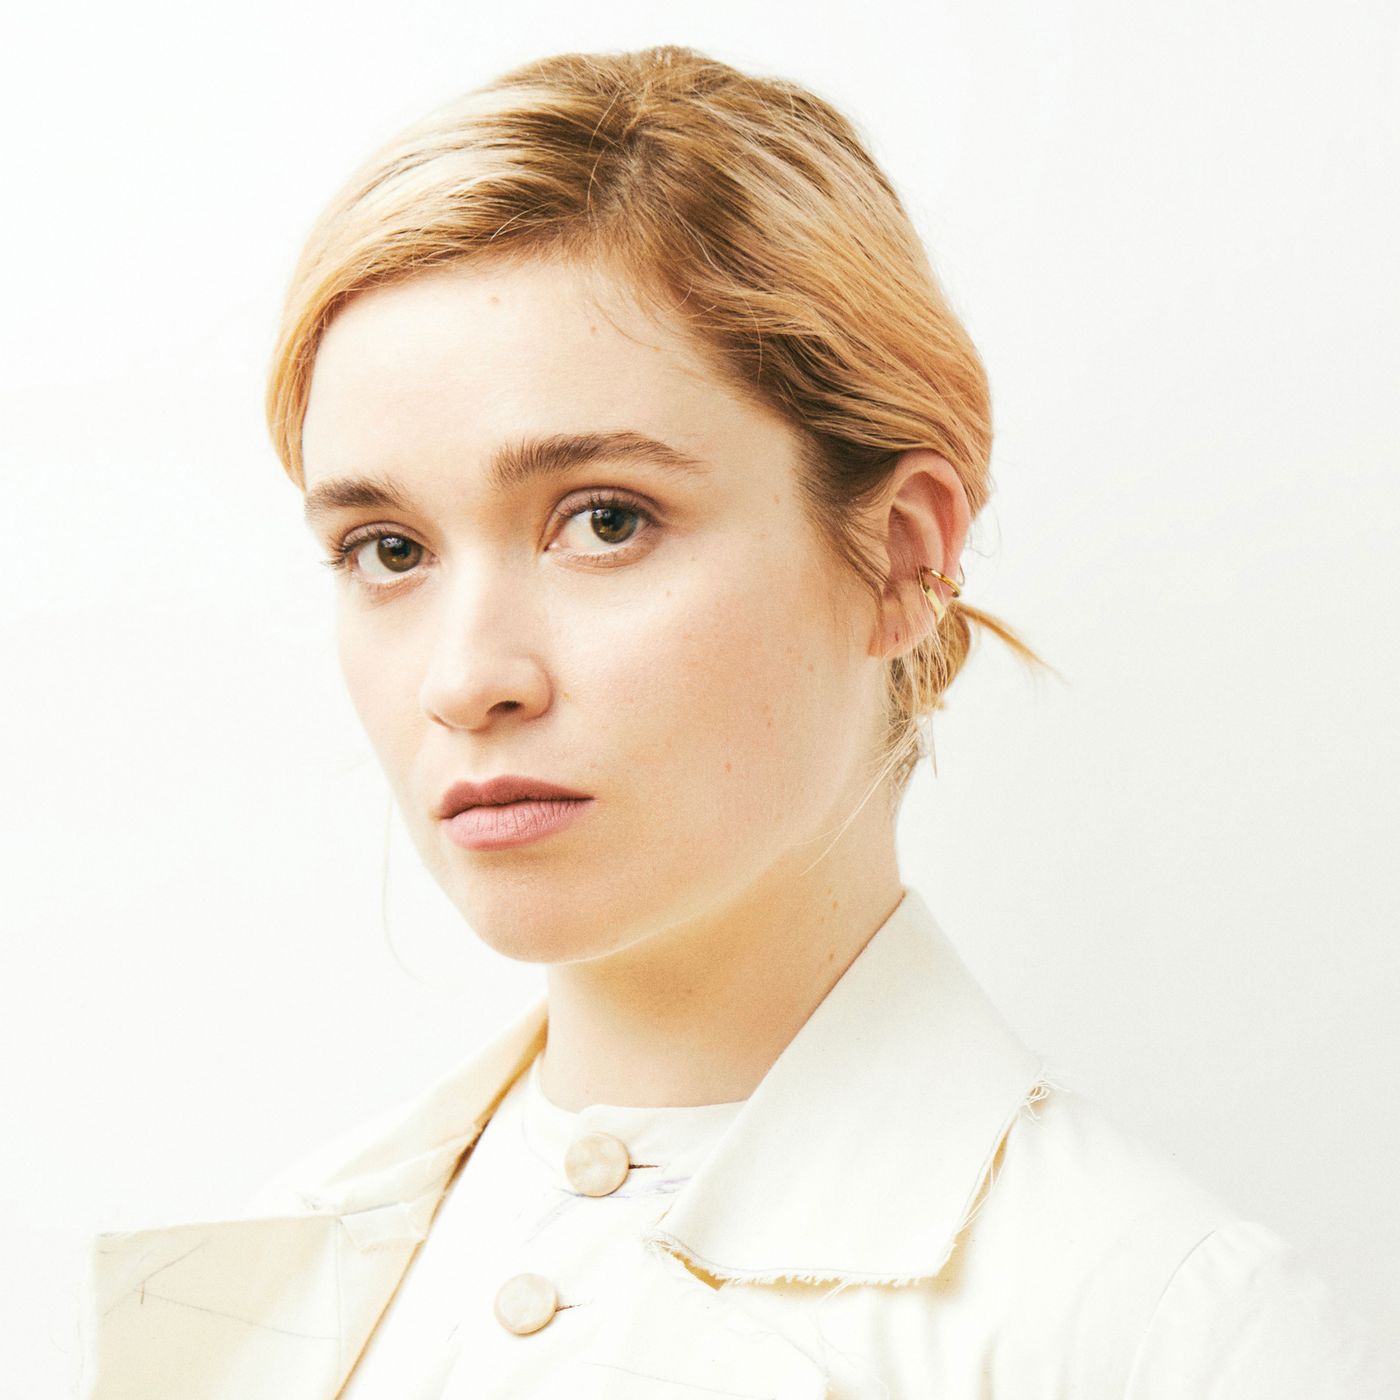 Dangerous Liaisons Star Alice Englert Interview on Playing Camille